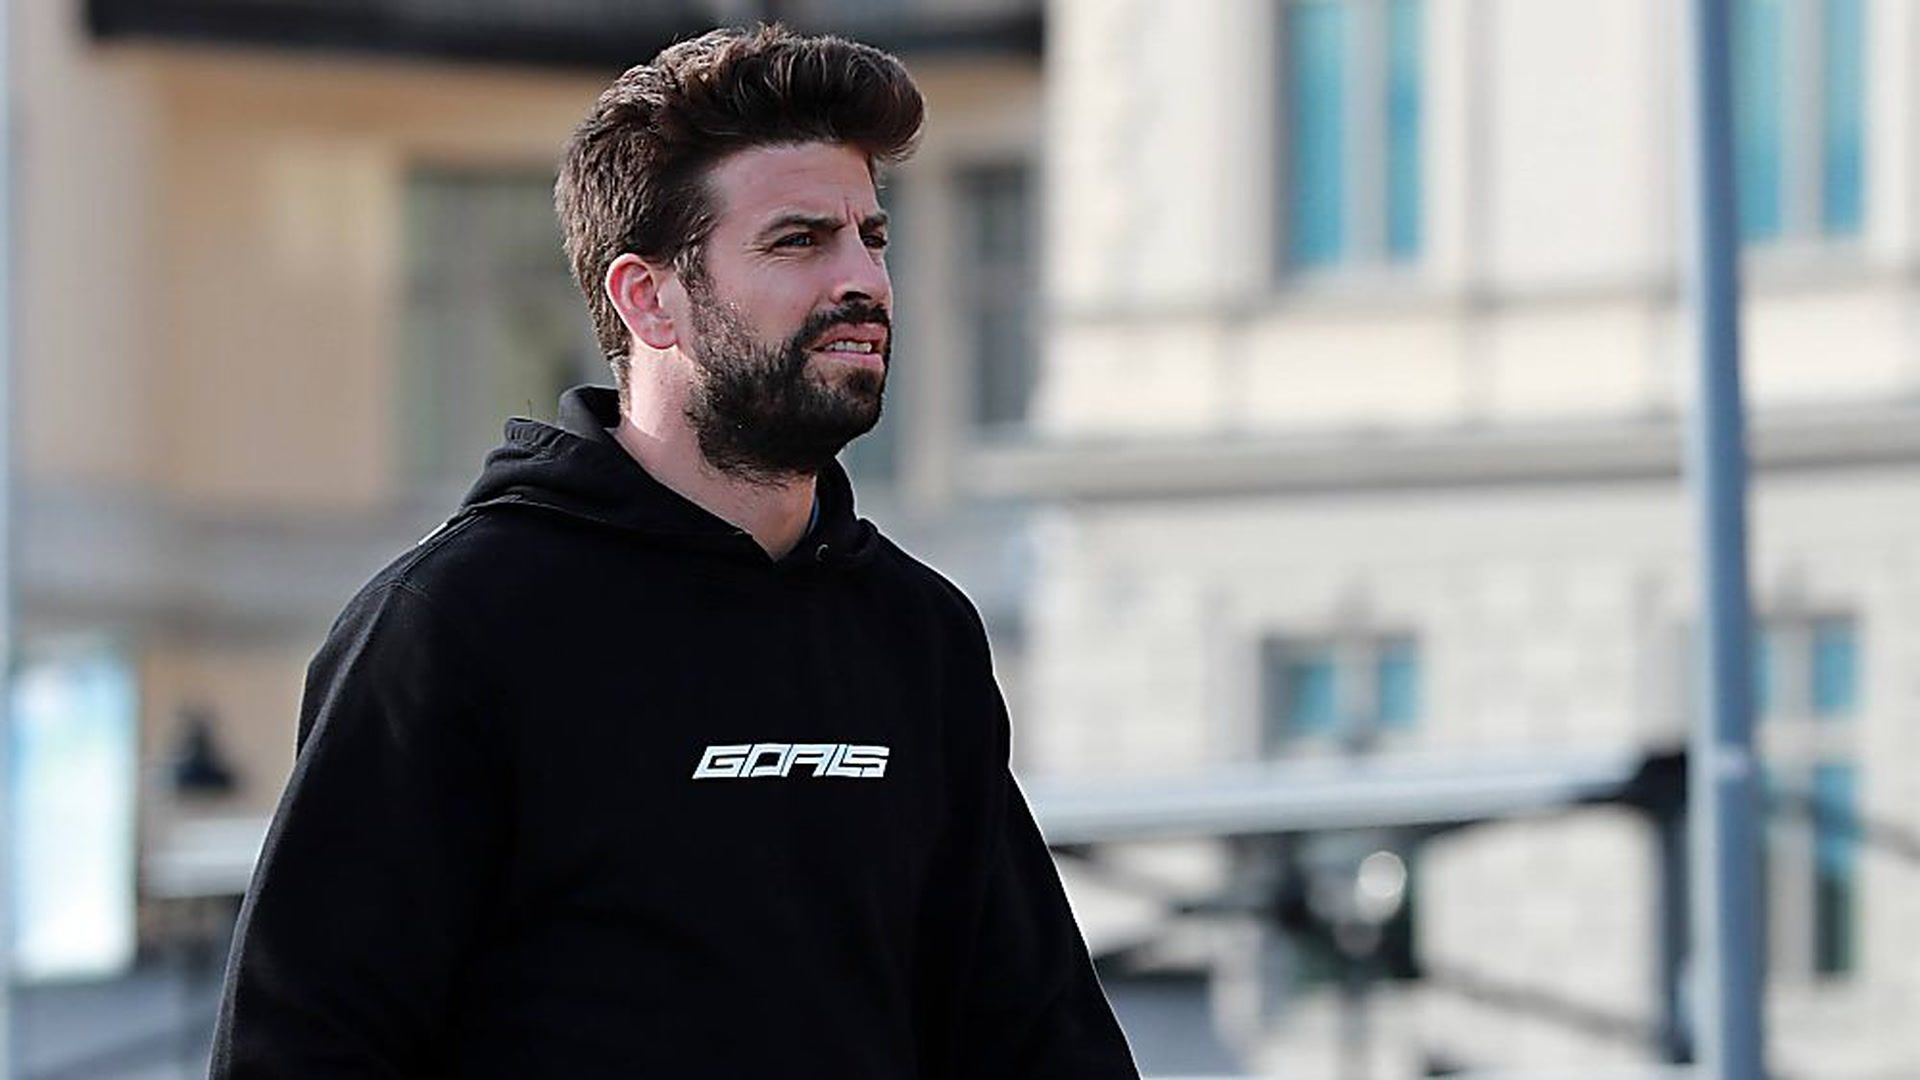 Has Gerard Piqué forgotten his youngest son in the business?